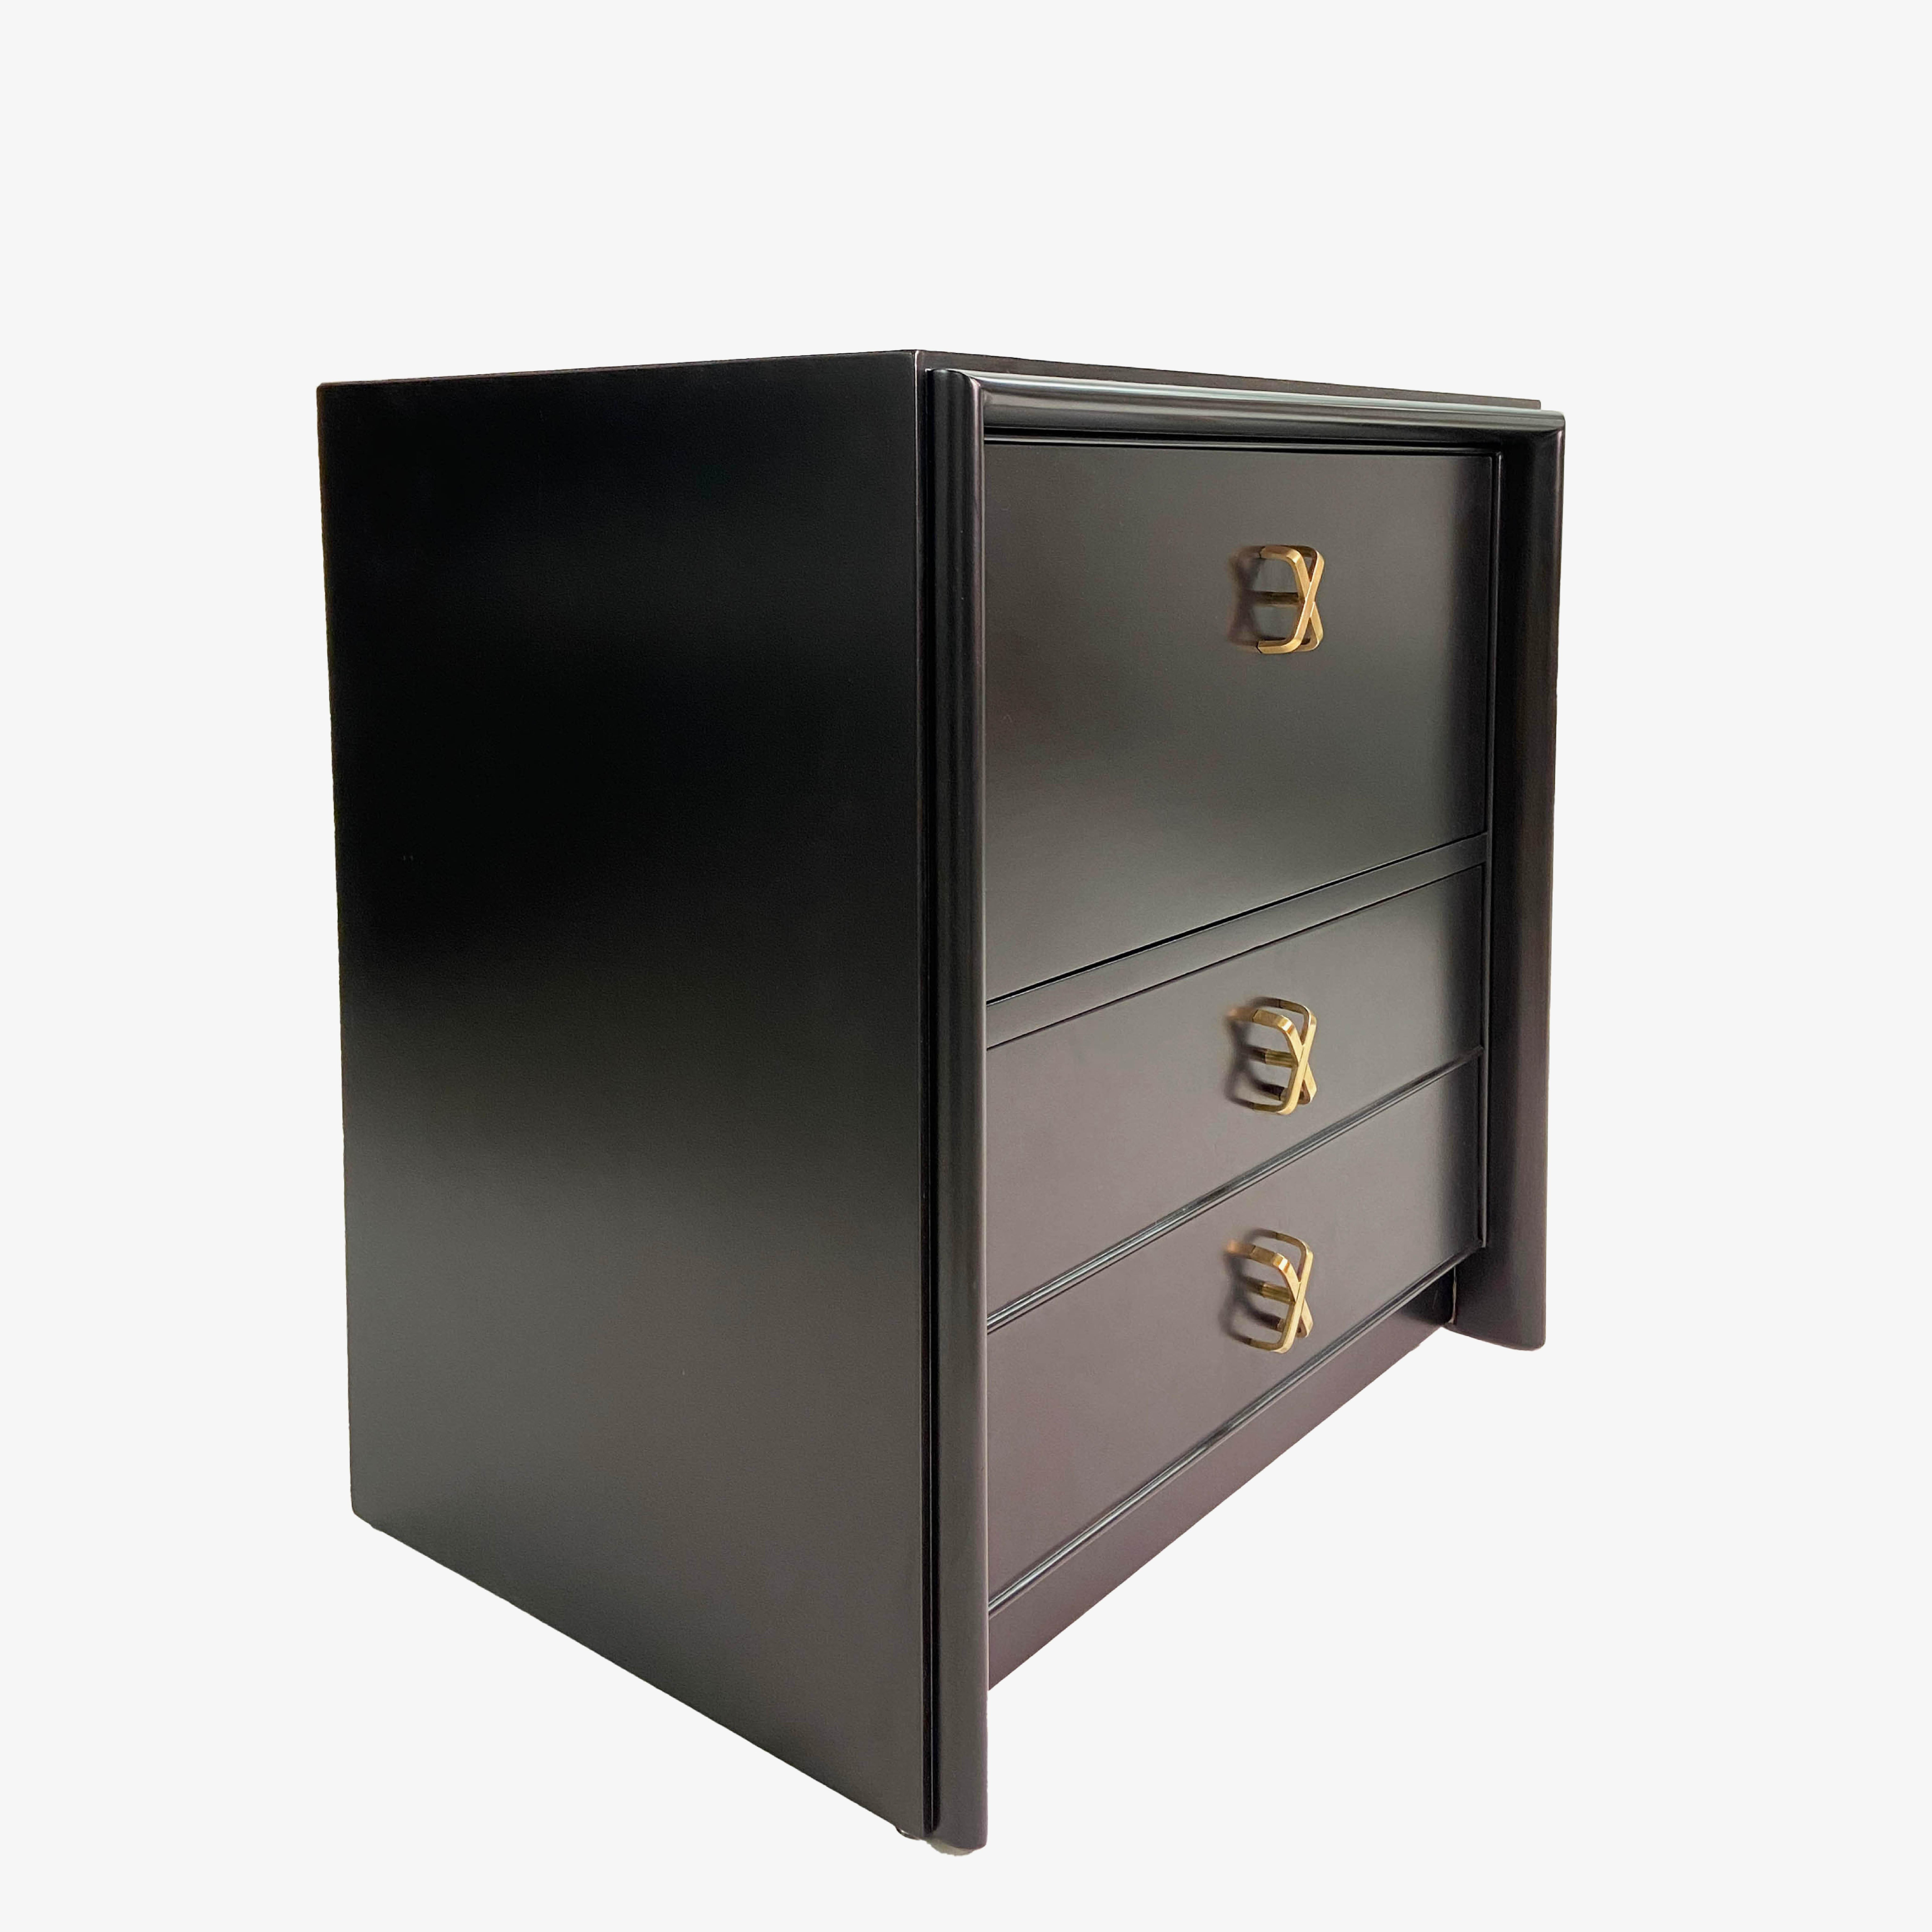 Stunning pair of Mid-Century Modern Paul Frankl Nightstands, expertly lacquered in Ebony. Each nightstand has a pull down top drawer with two bottom drawers. Original hardware in solid brass. A timeless Frankl design for Johnson Furniture Co., circa